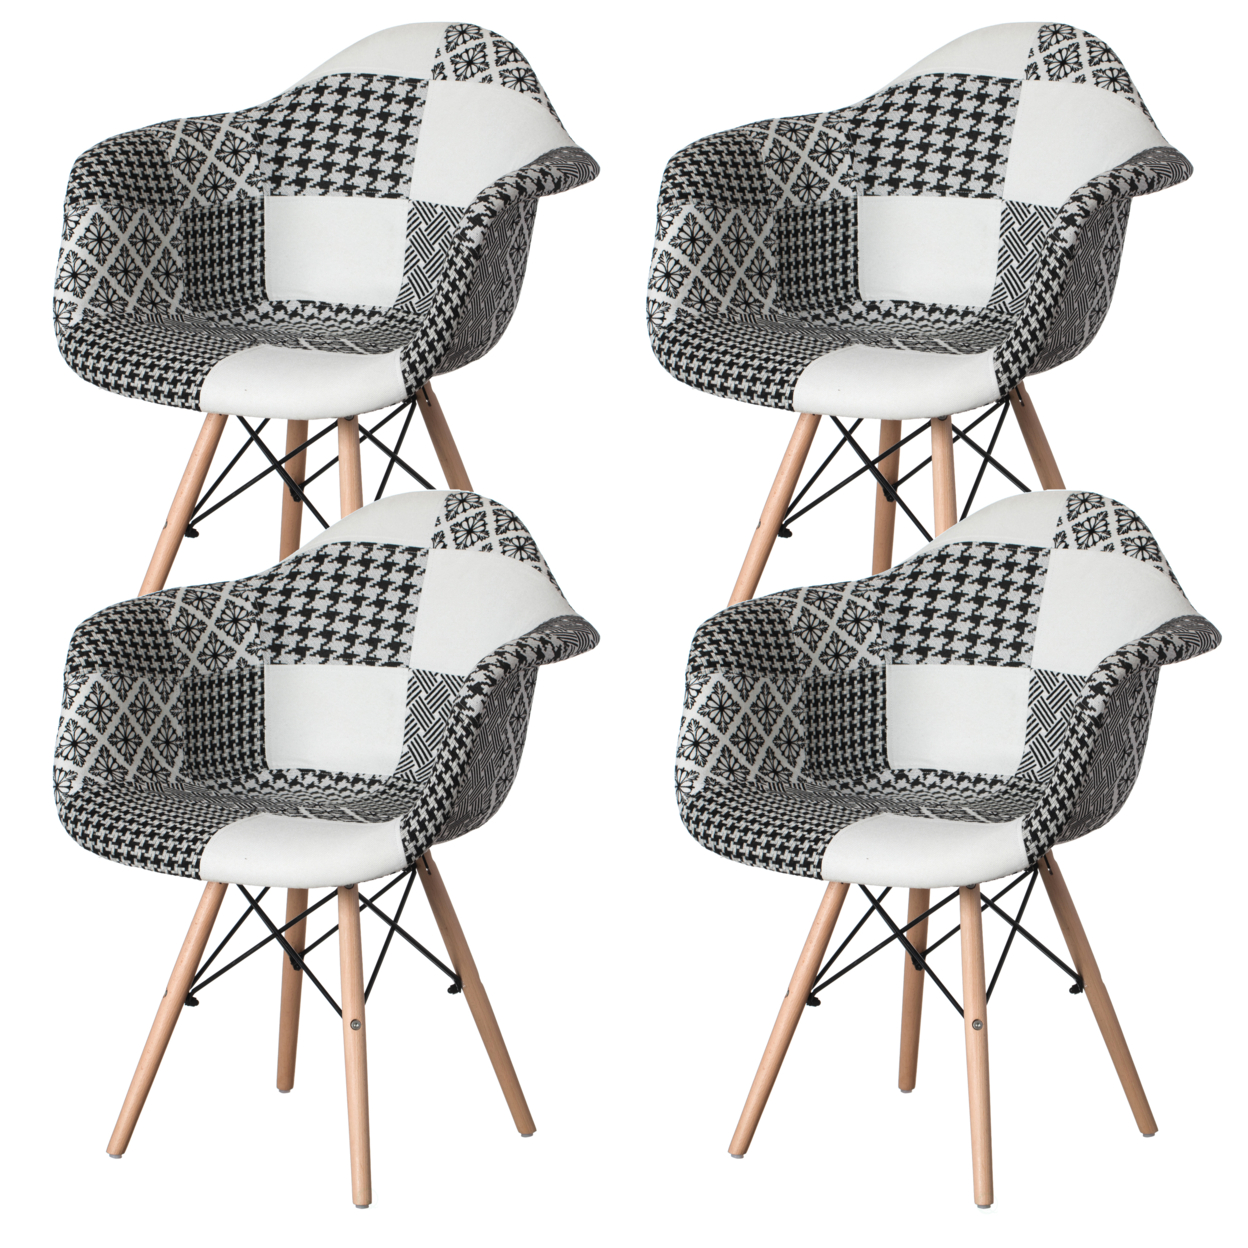 Mid-Century Modern Style Fabric Lined Armchair with Beech Wooden Legs - Black and White Set of 4